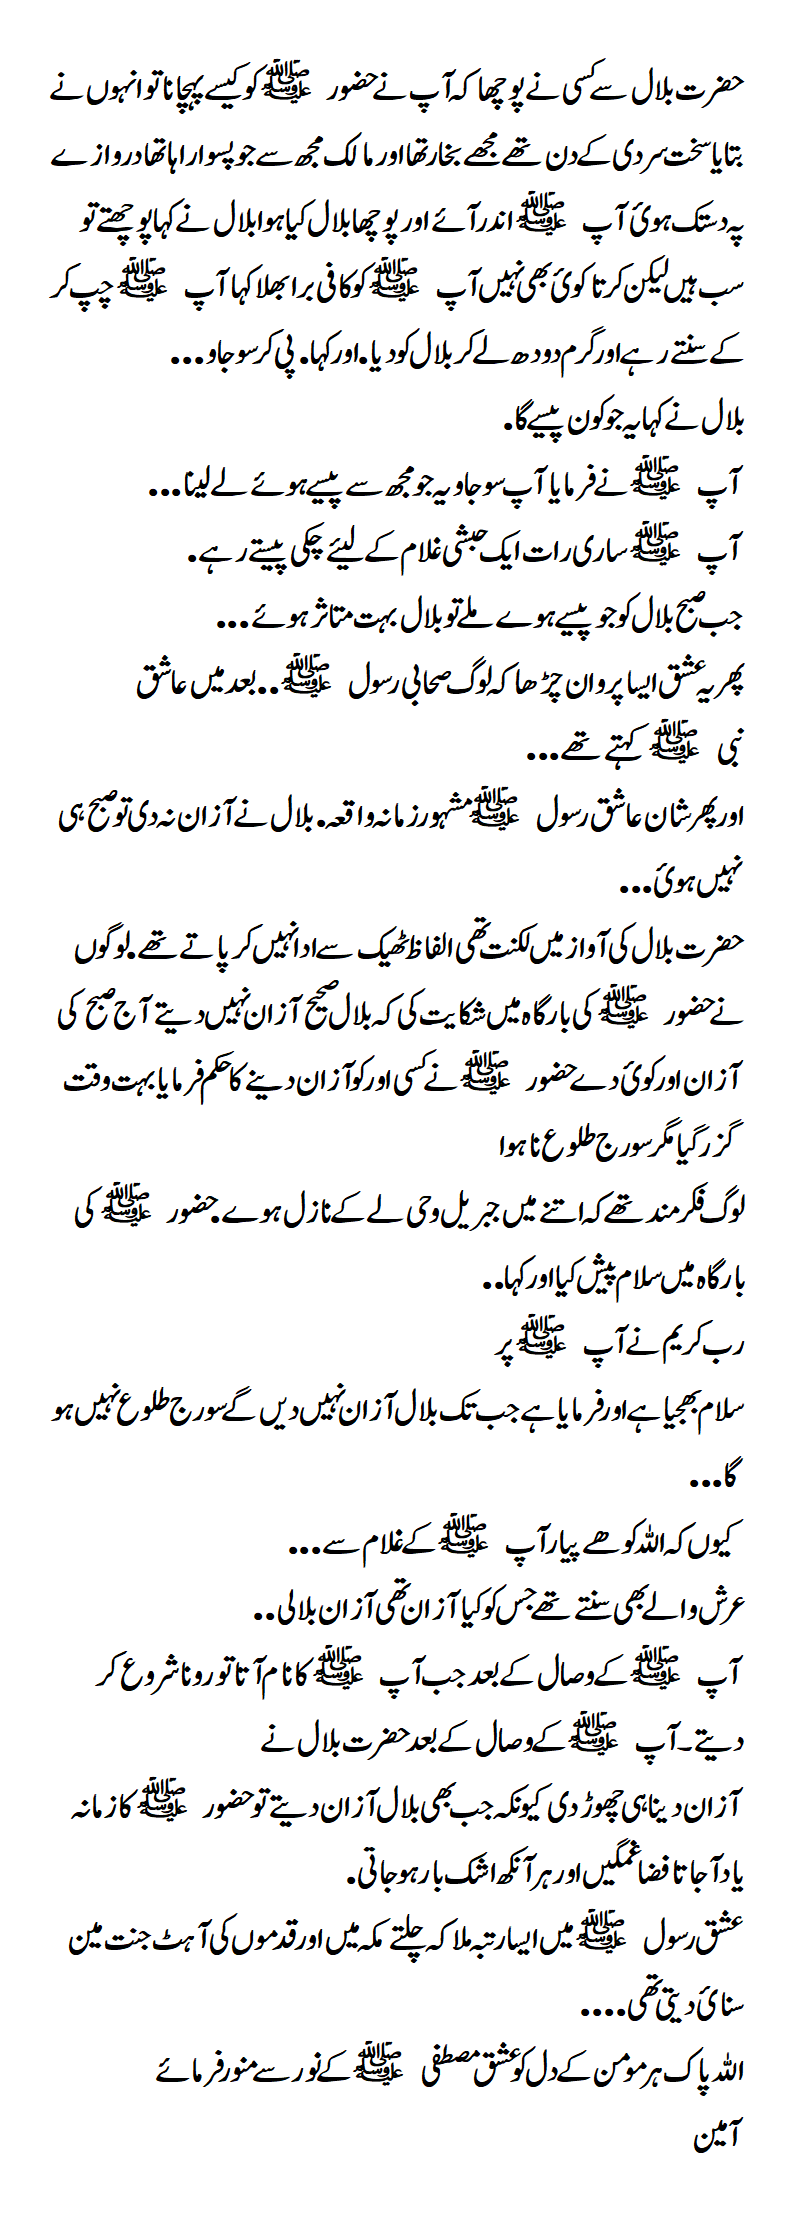 Someone asked Hazrat Bilal how he recognized the Holy Prophet